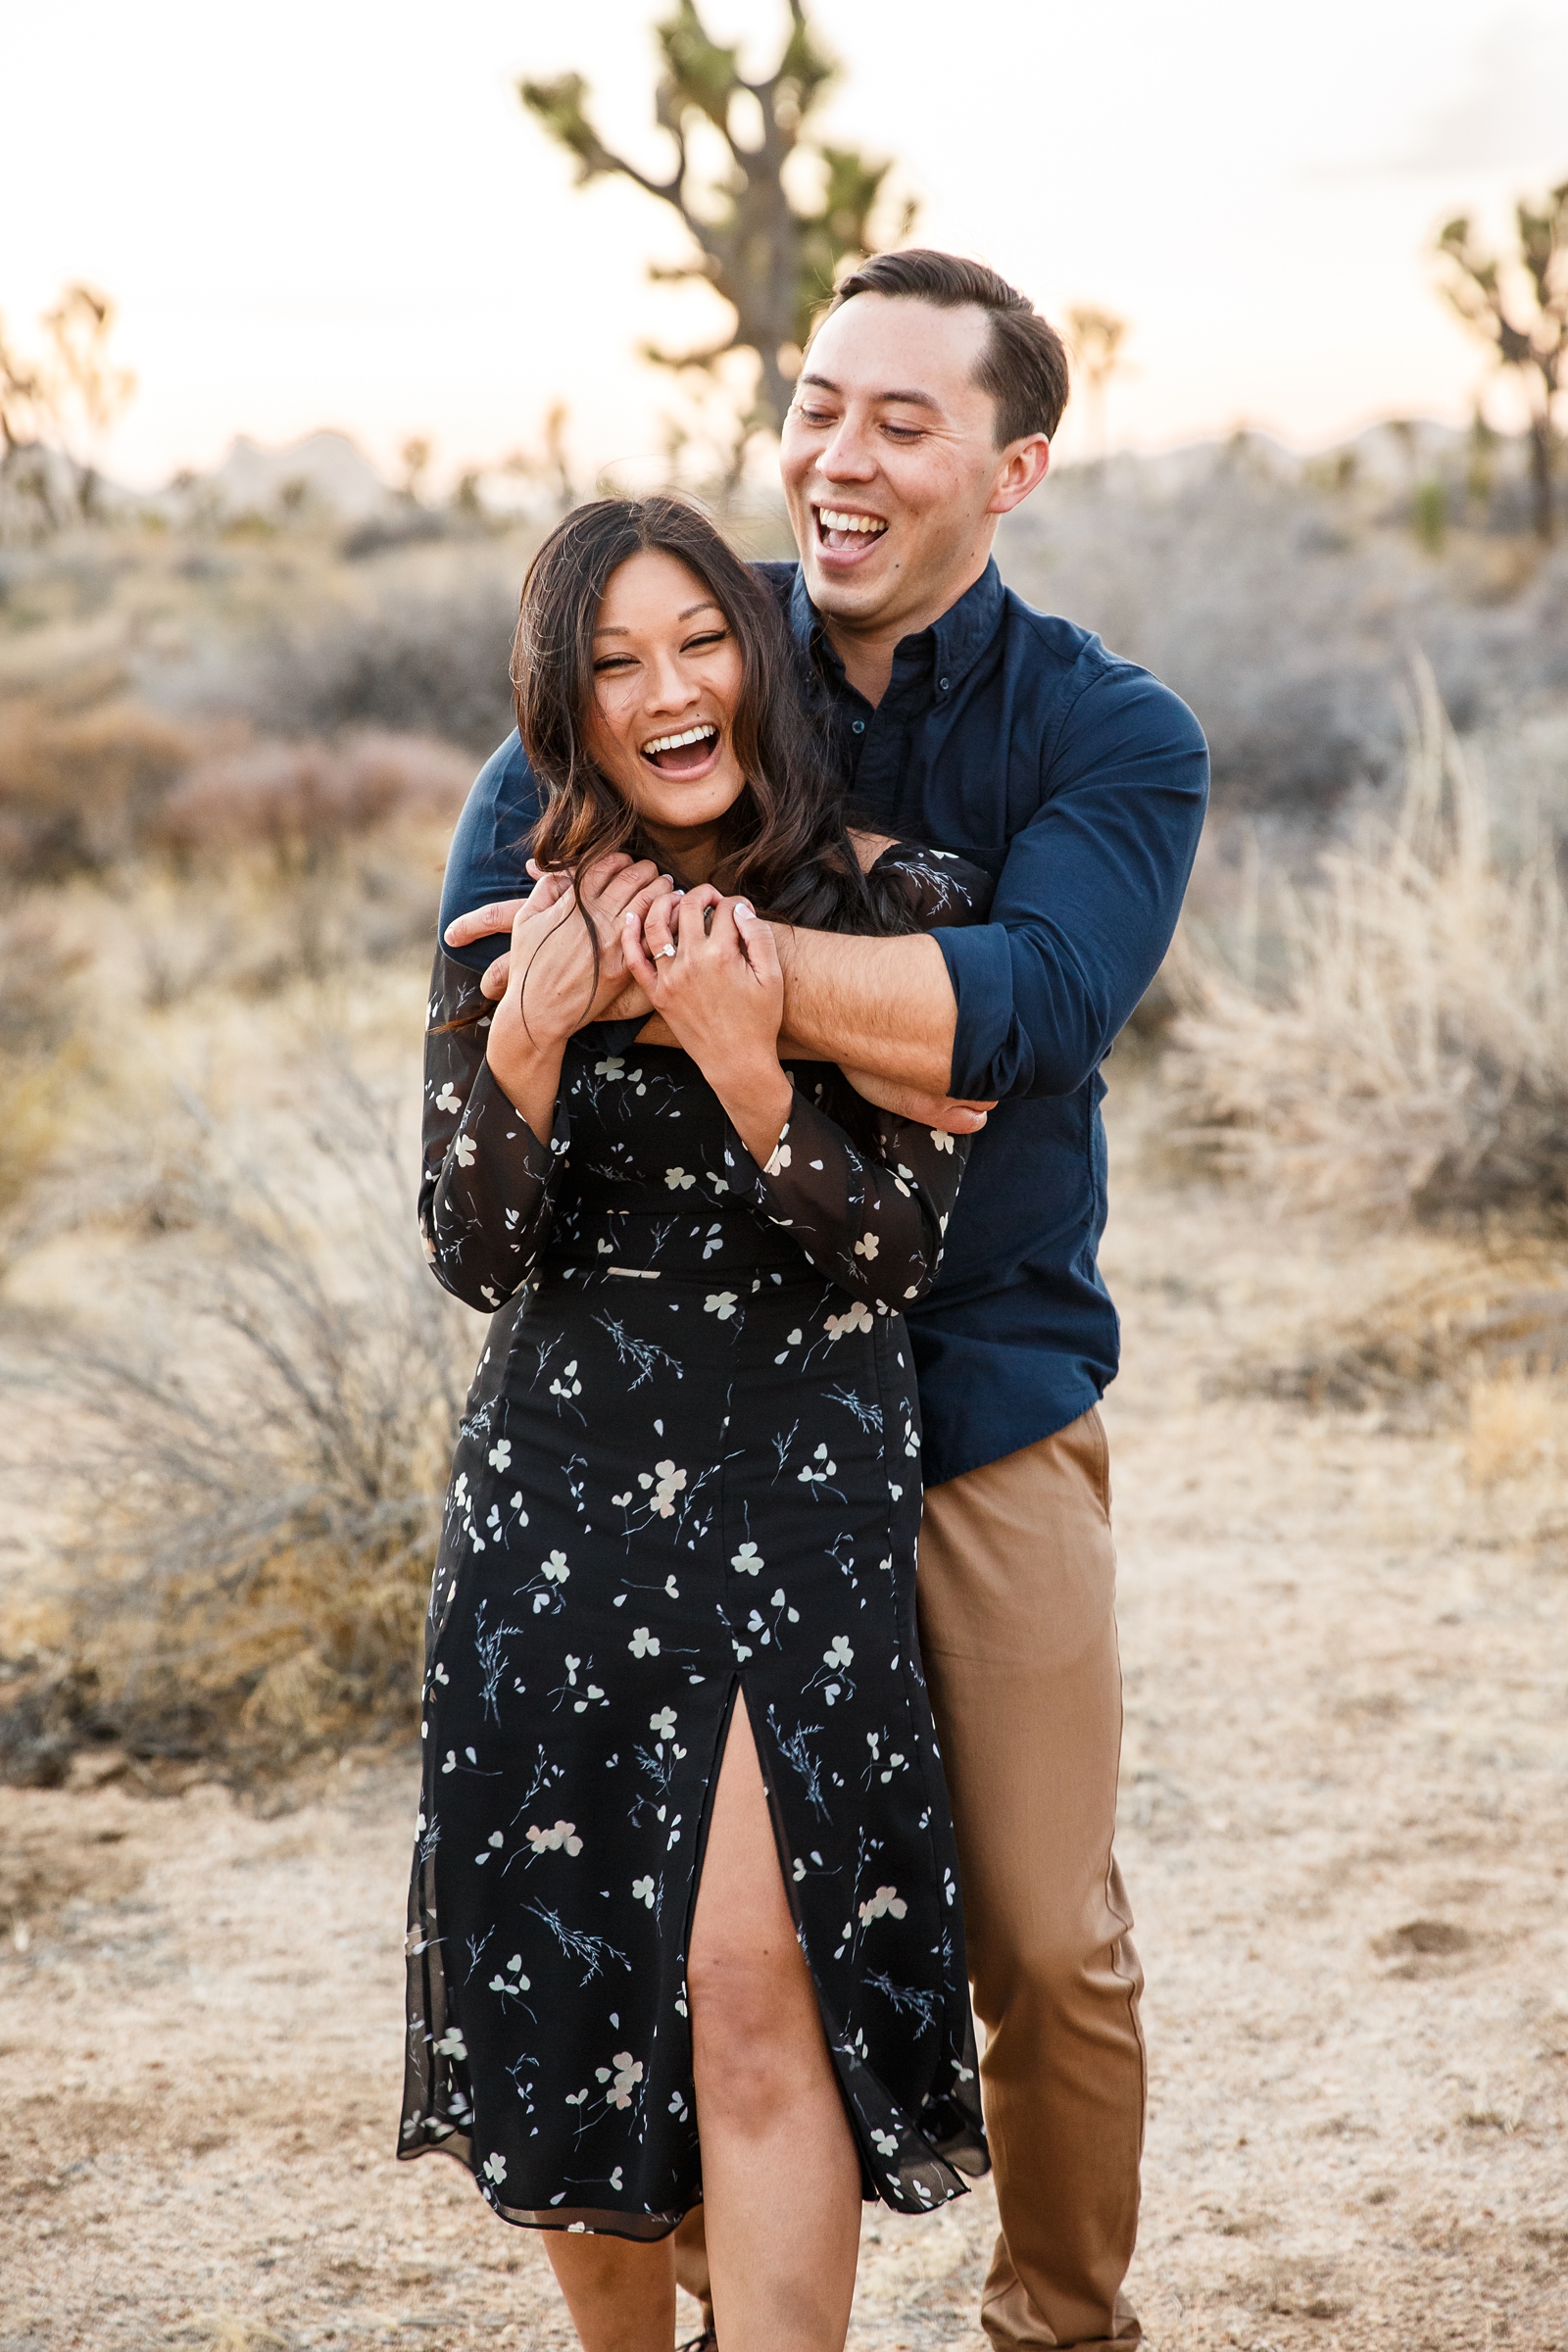 This engaged couple was full of joy at their Joshua Tree engagement session.